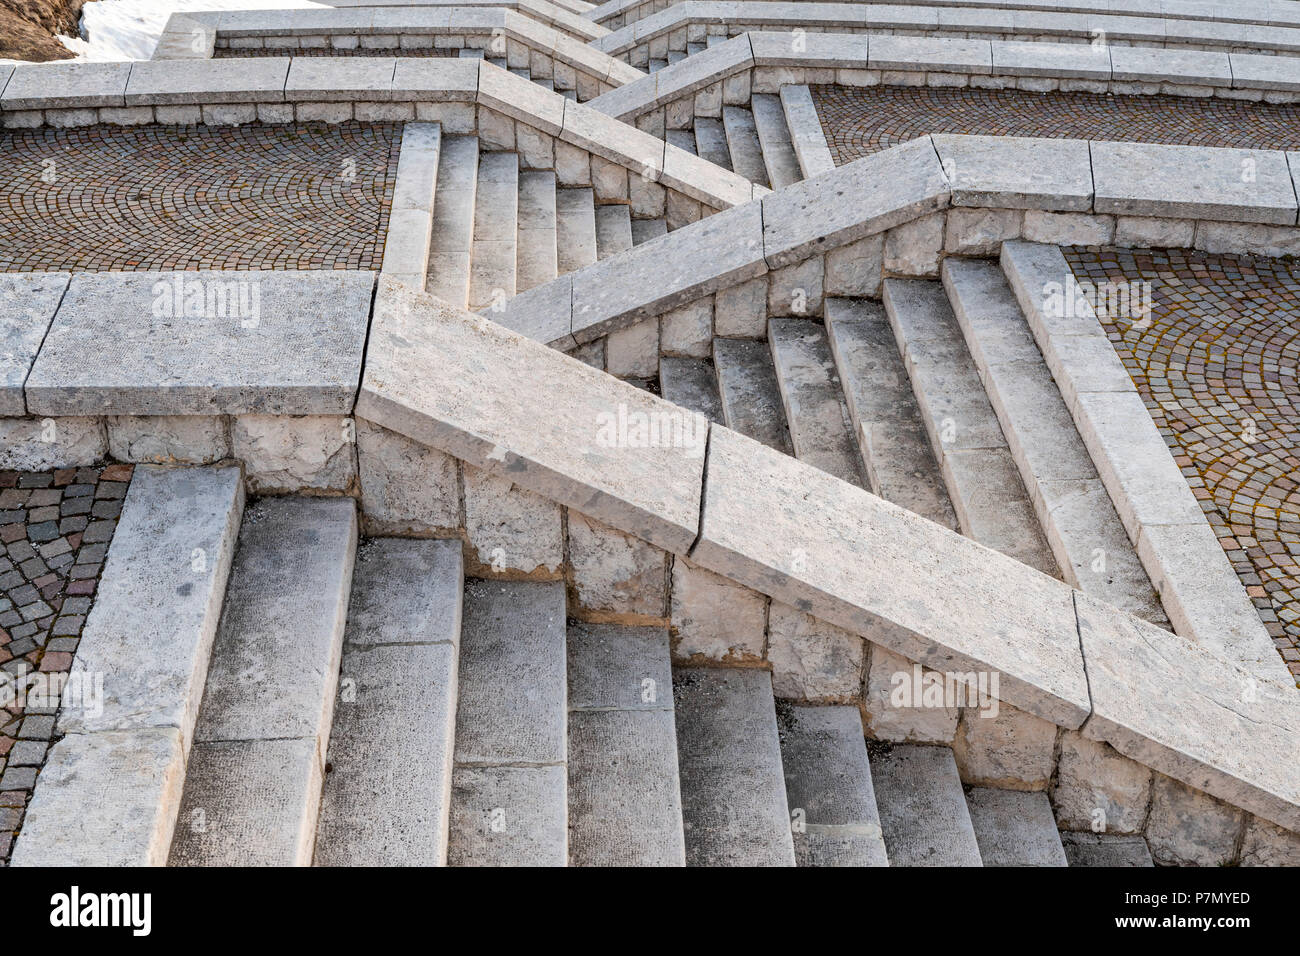 Monte Grappa, province of Treviso, Veneto, Italy, Europe, Stairs at the military memorial monument Stock Photo